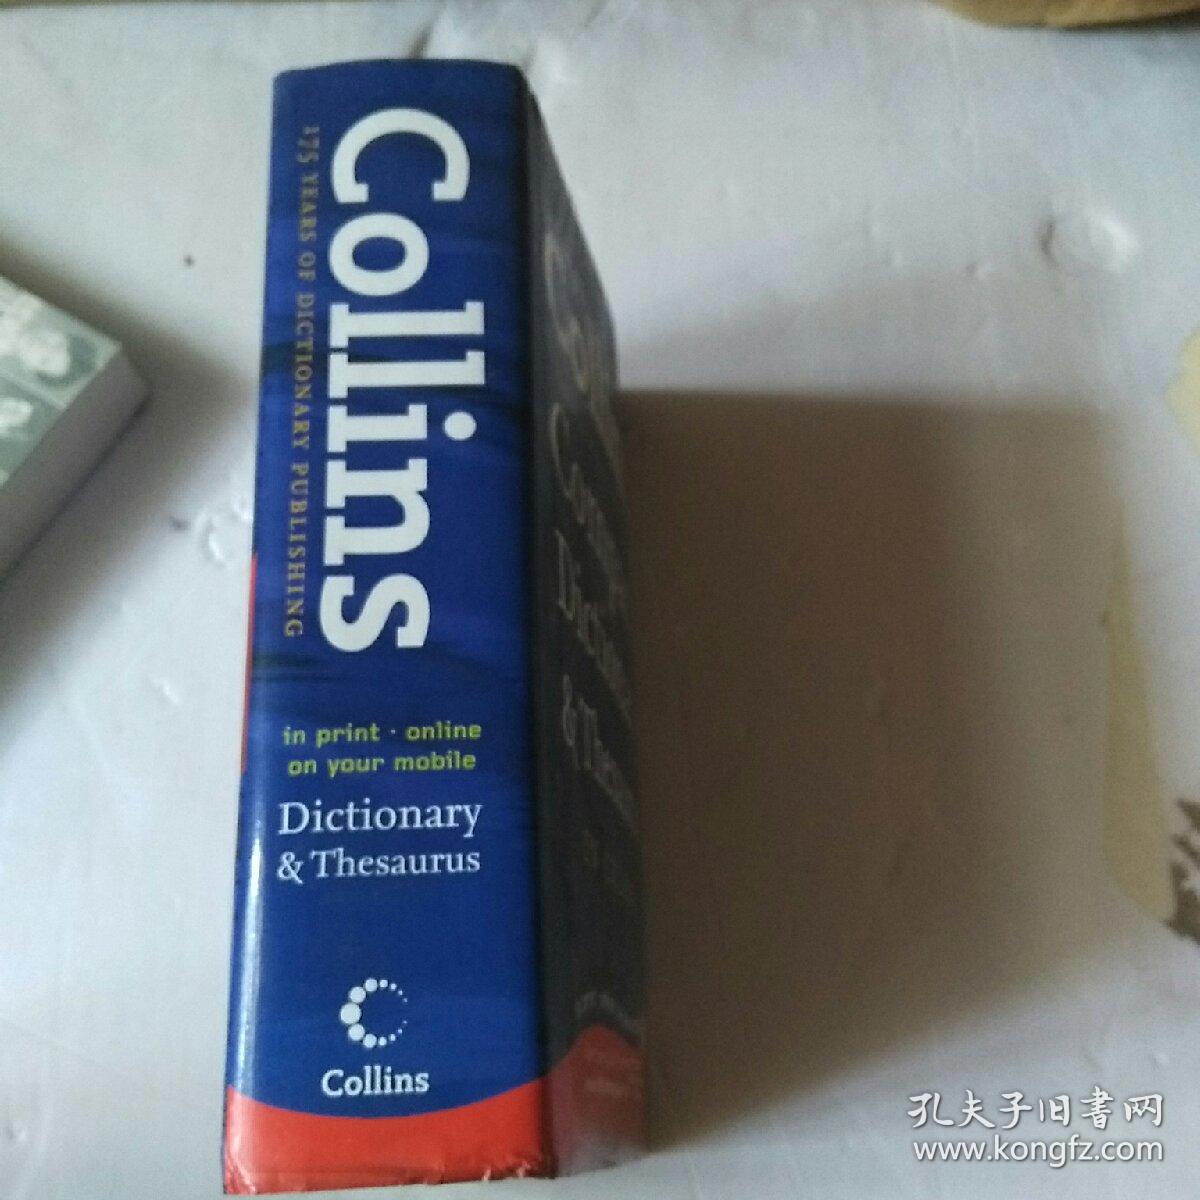 ins Compact Dictionary and Thesaurus[柯林斯简